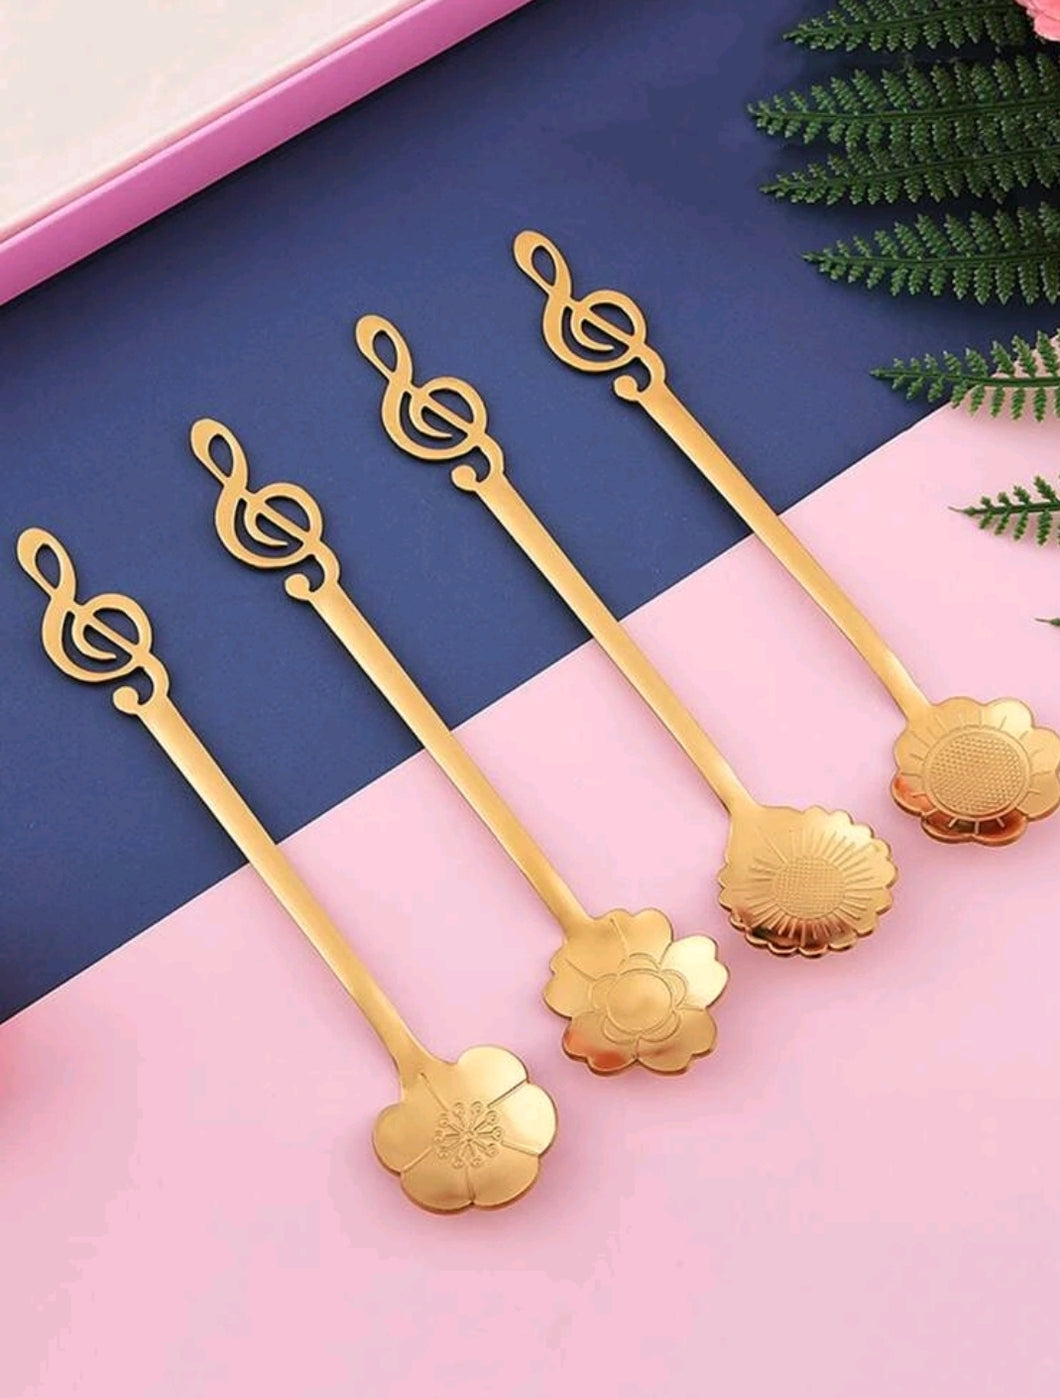  '4 pcs of this adorable music spoon set with floral design! Match it with other Rovistella's item such as the espresso cups and make your guests surprised by the beauty of this set!'      Colour: Gold     Pattern Type: Floral/Music     Type: Spoon     Material: Stainless Steel (dry it well after washing by hand)     Size: Length 13.5 cm (5.3 inch) X Width 2.8cm (1.1inch)